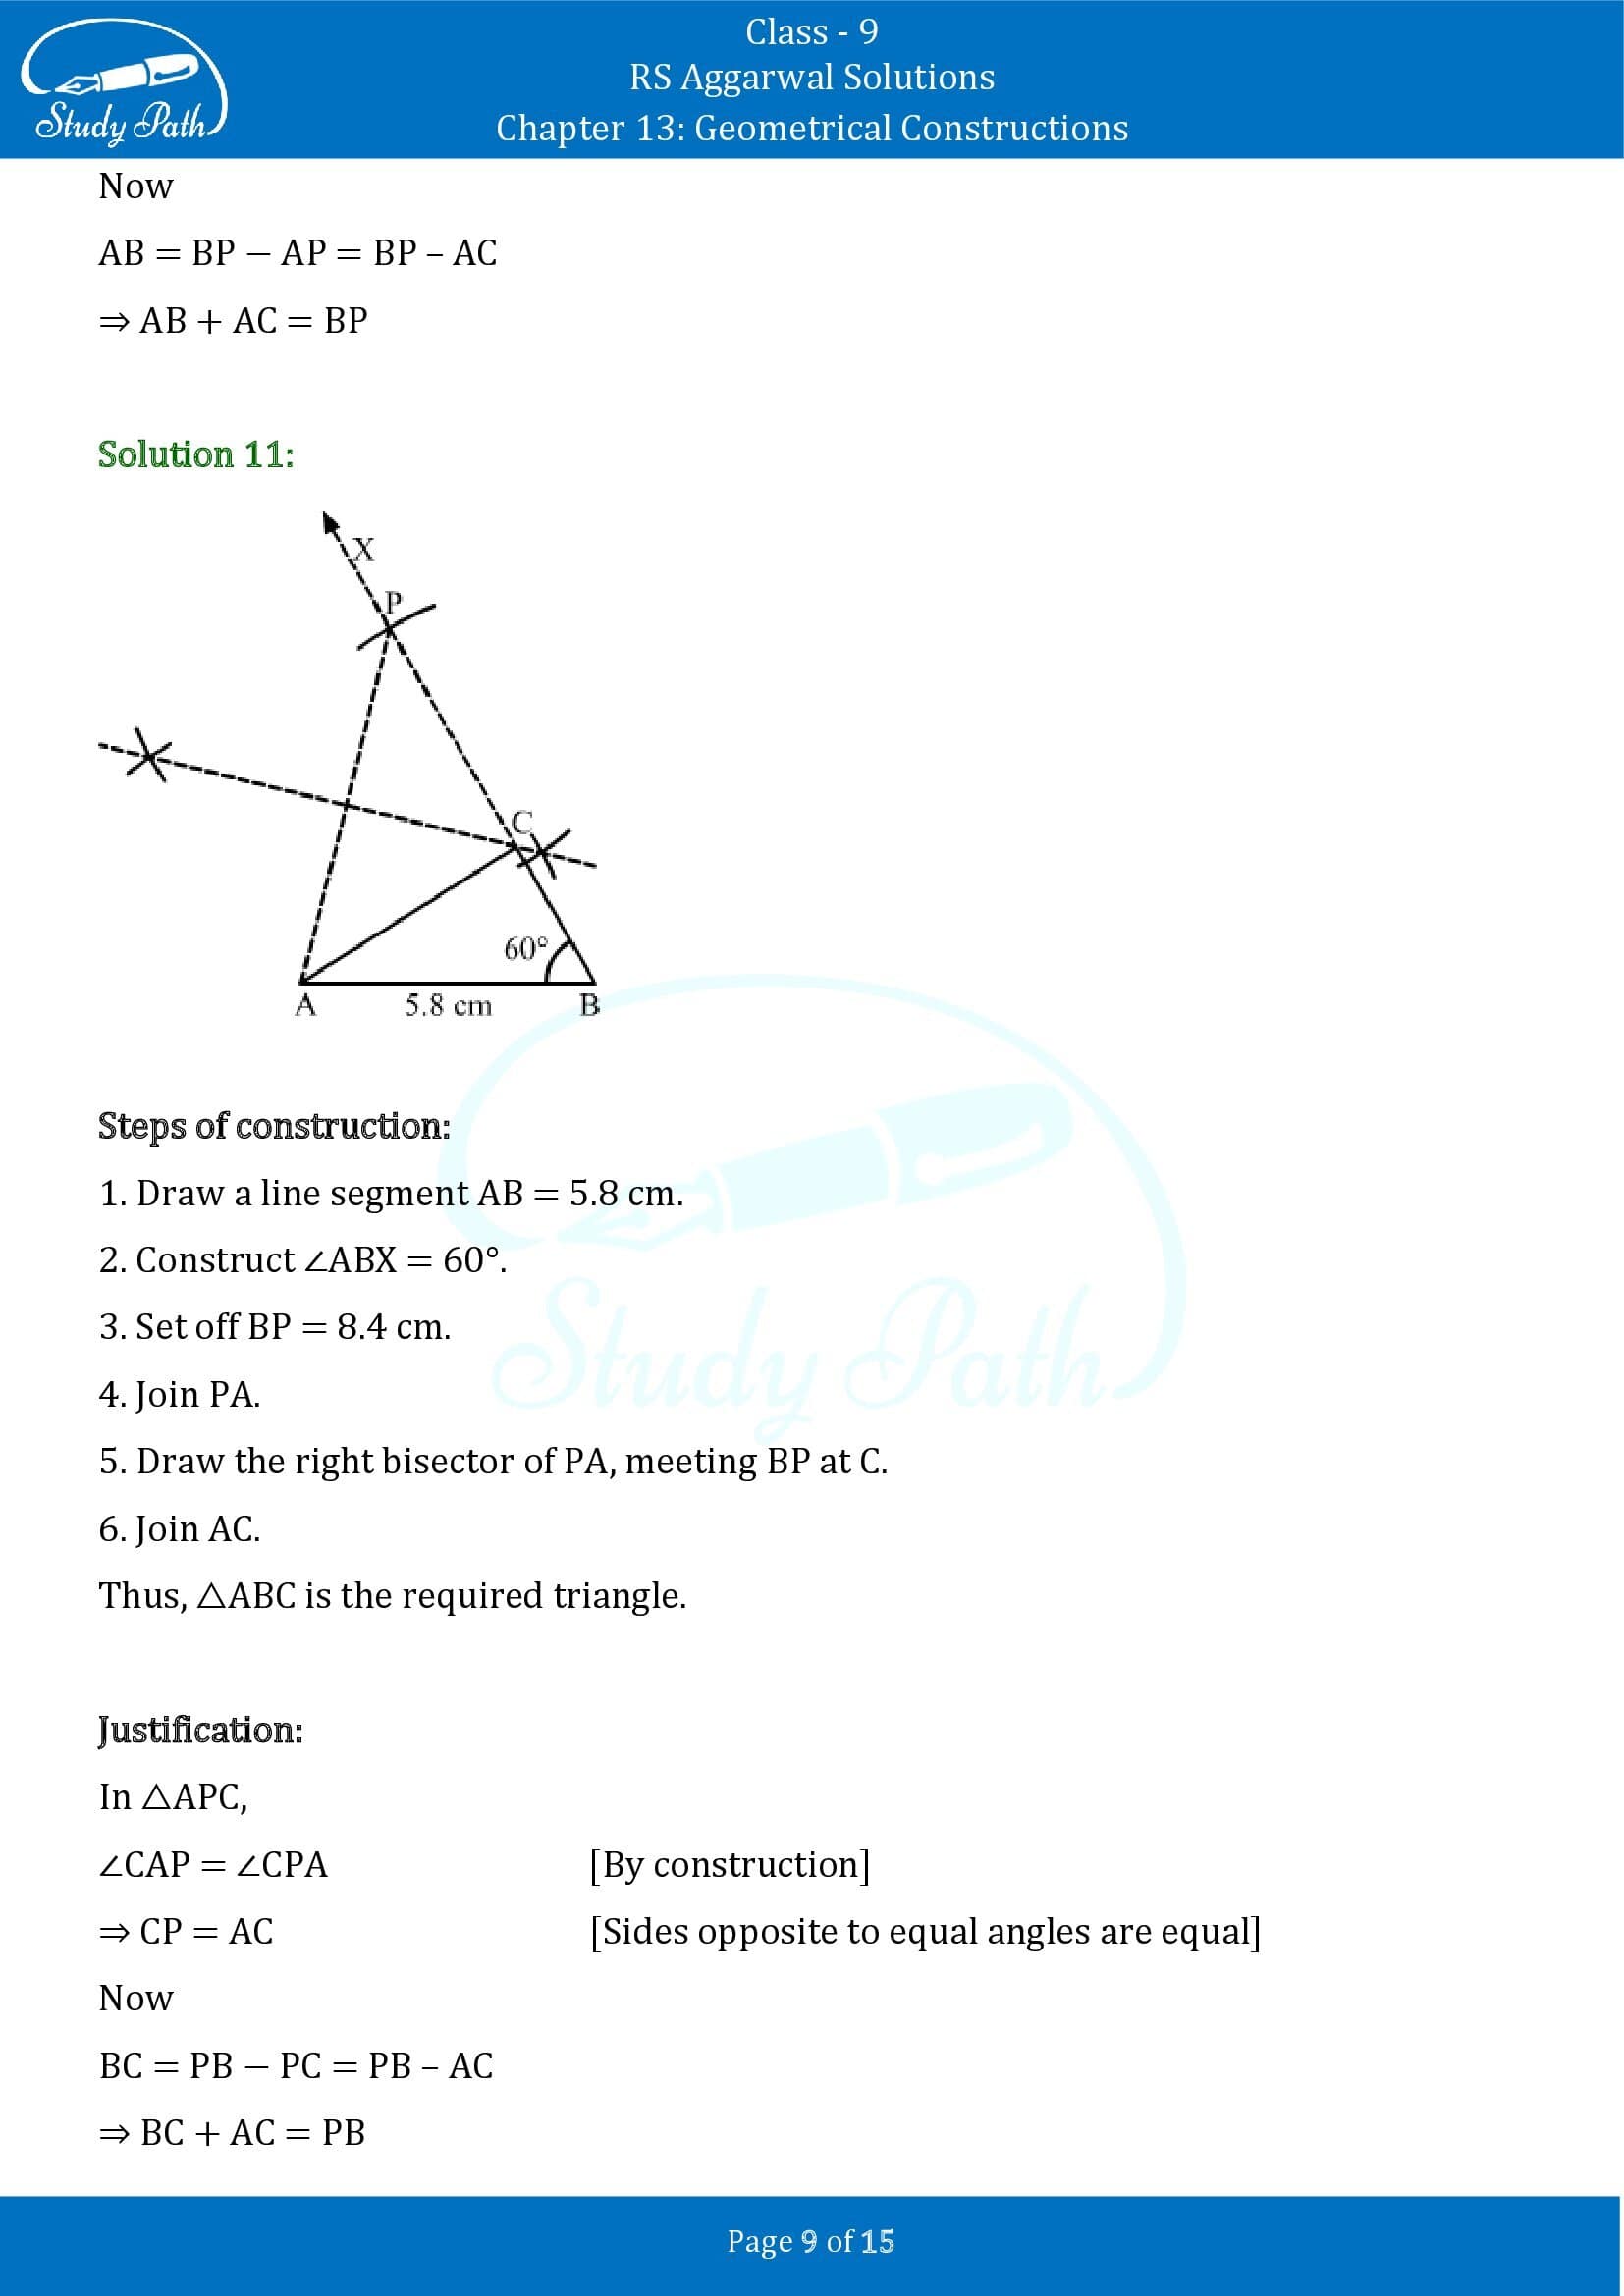 RS Aggarwal Solutions Class 9 Chapter 13 Geometrical Constructions 09